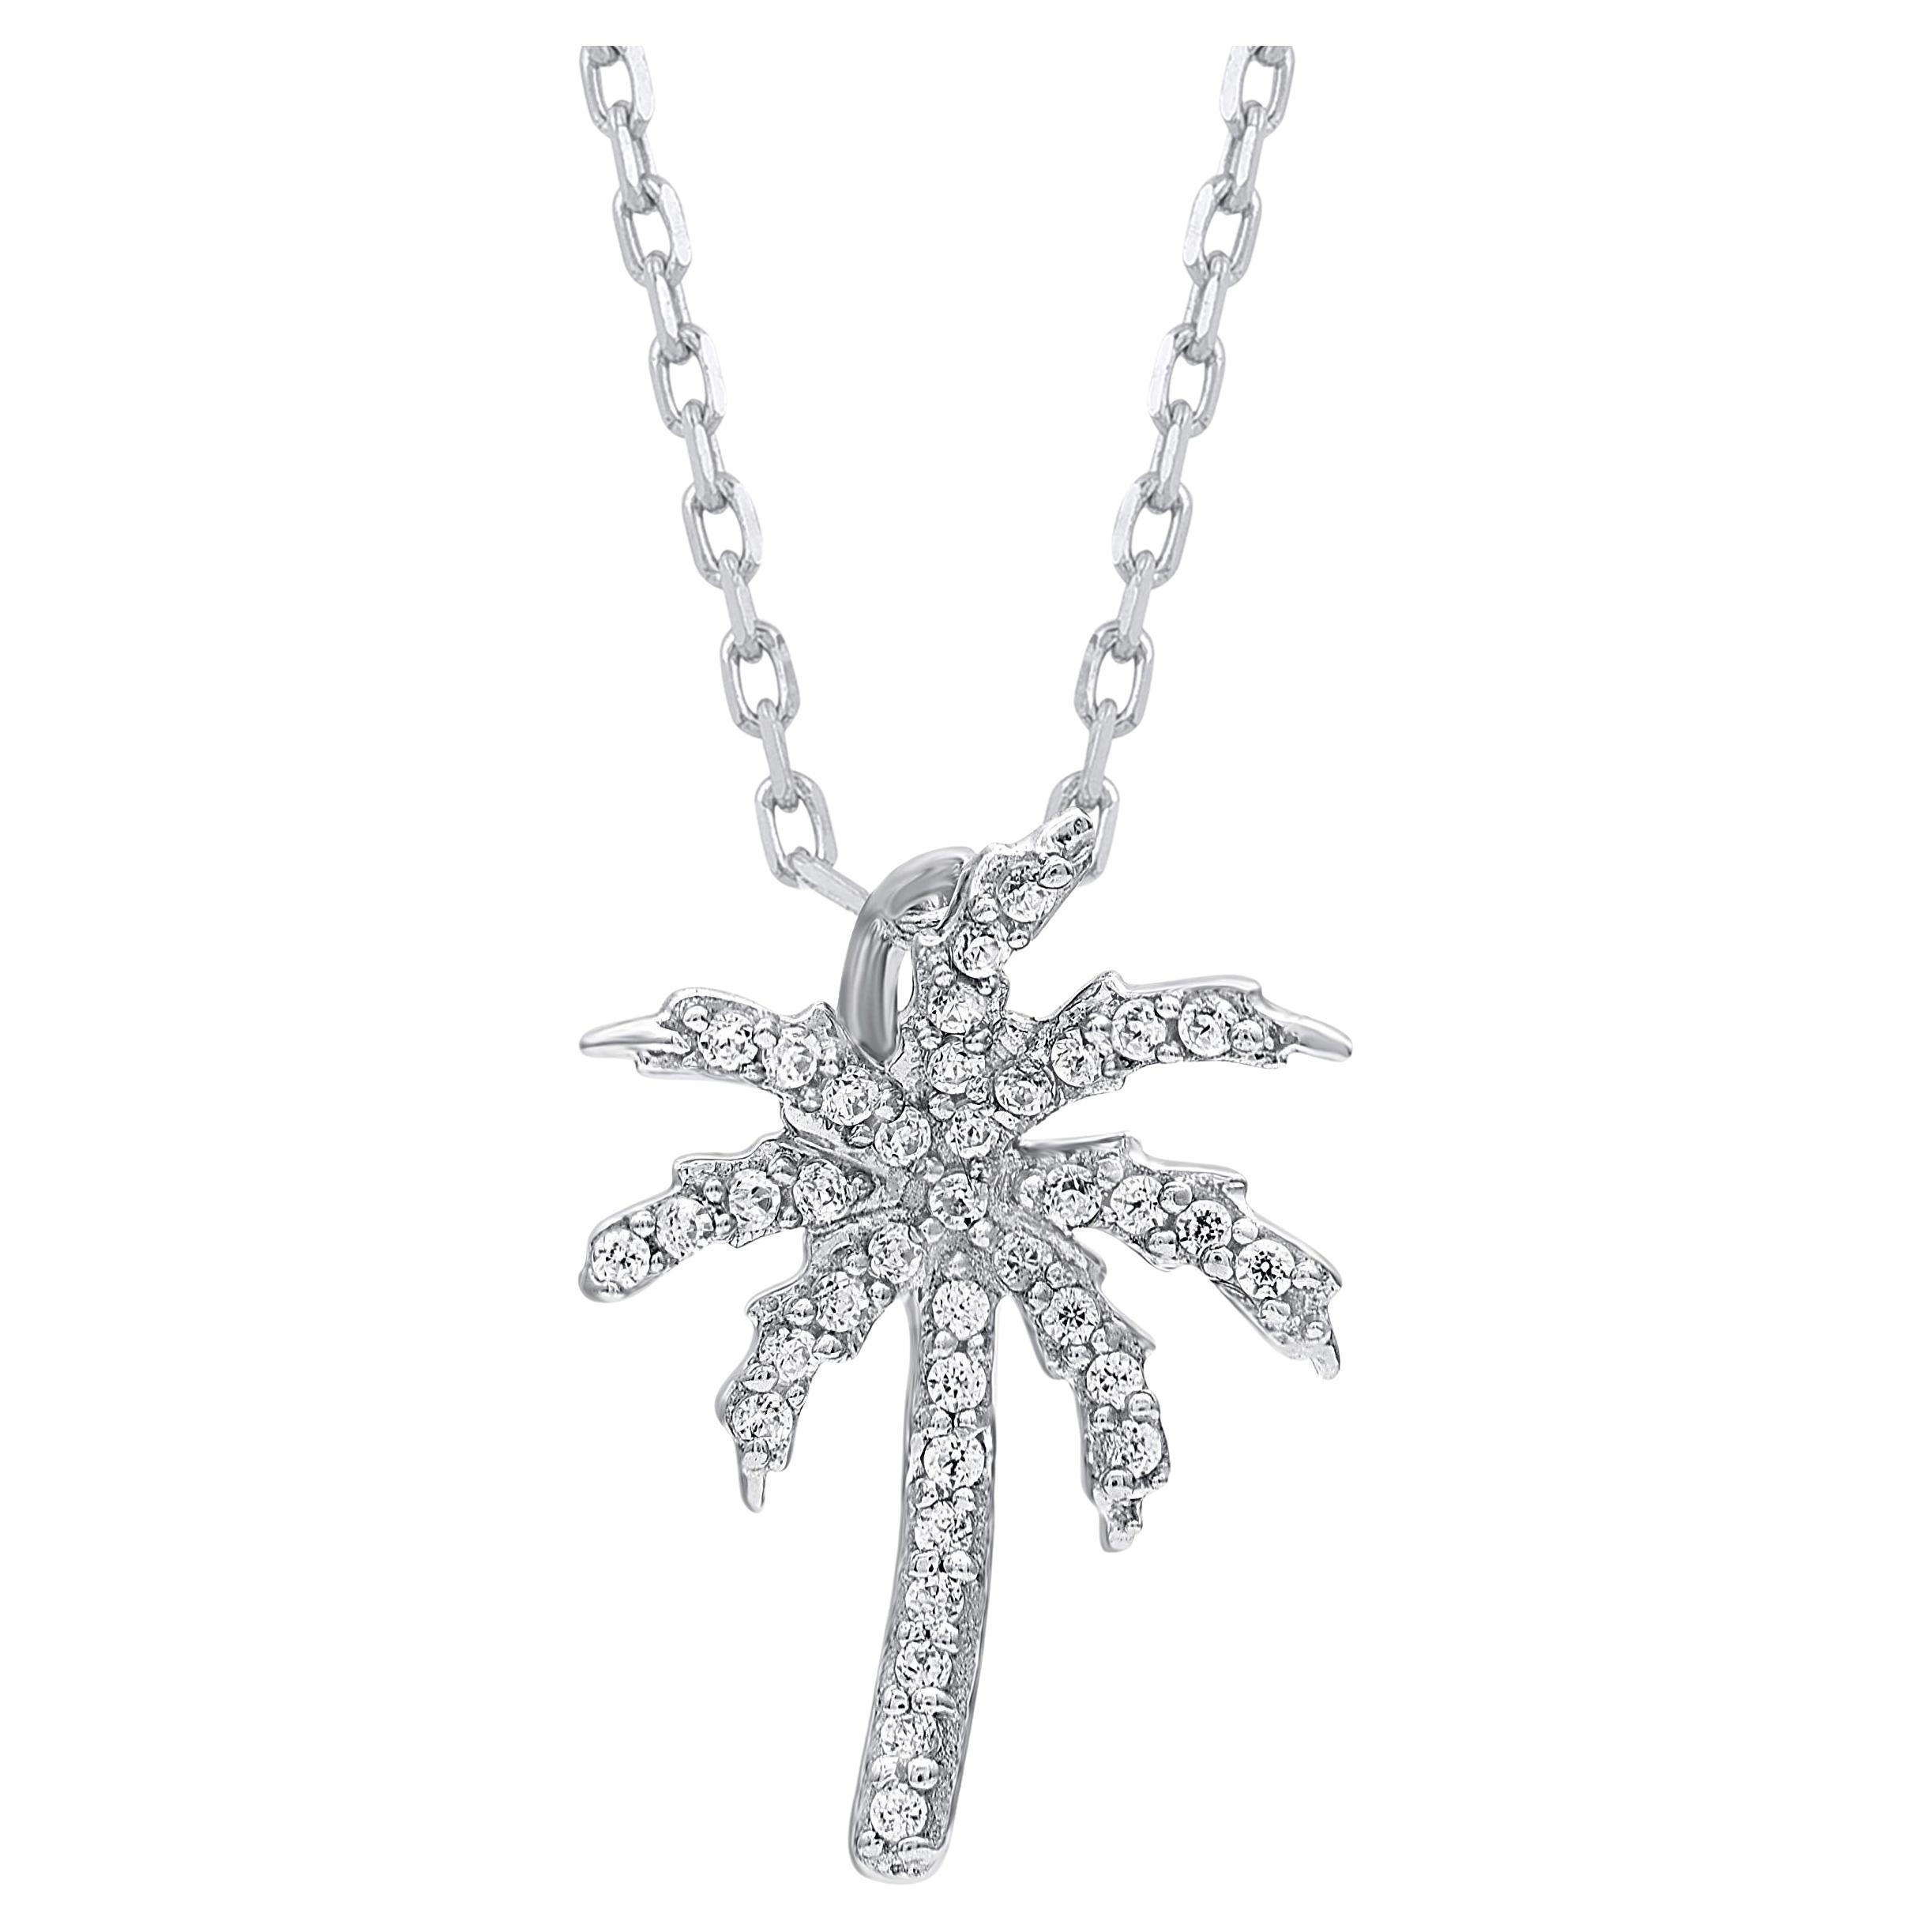 TJD 0.08 Carat Natural Round Diamond 14KT White Gold Palm Tree Pendant Necklace For Sale